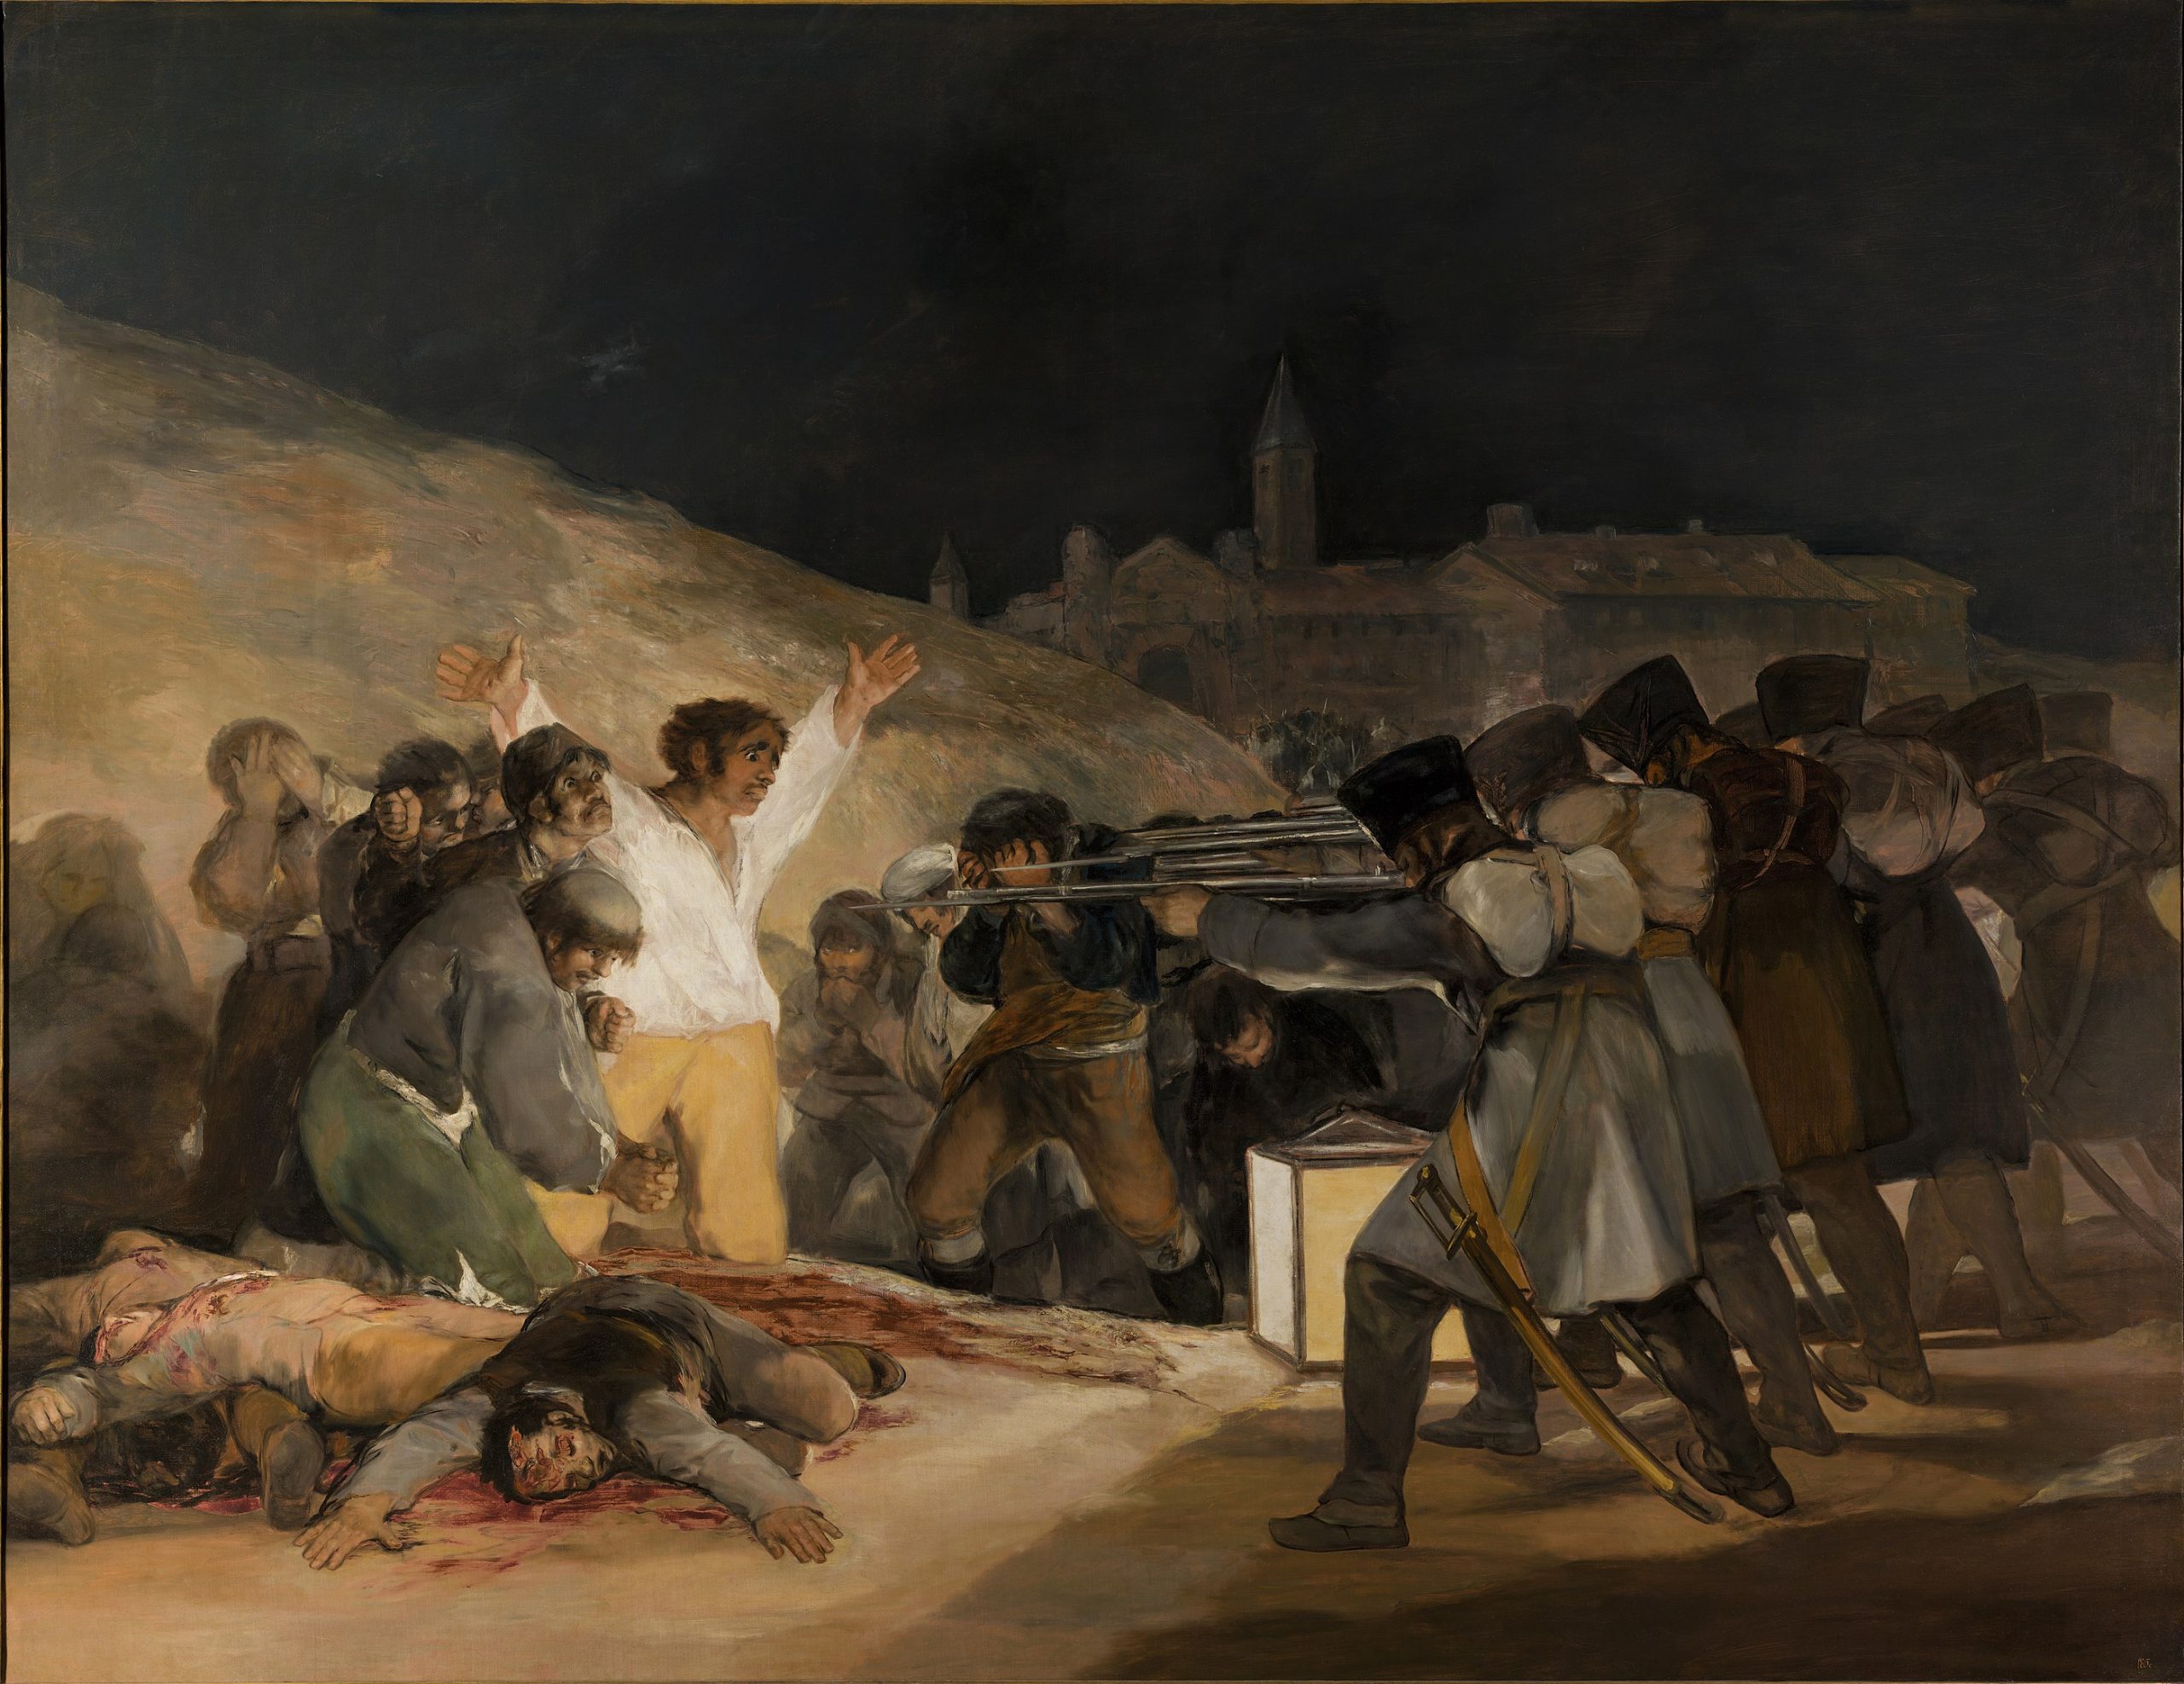 A man with arms outstretched being held at gunpoint by multiple soldiers while civilians cower in fear and lie motionless in the foreground